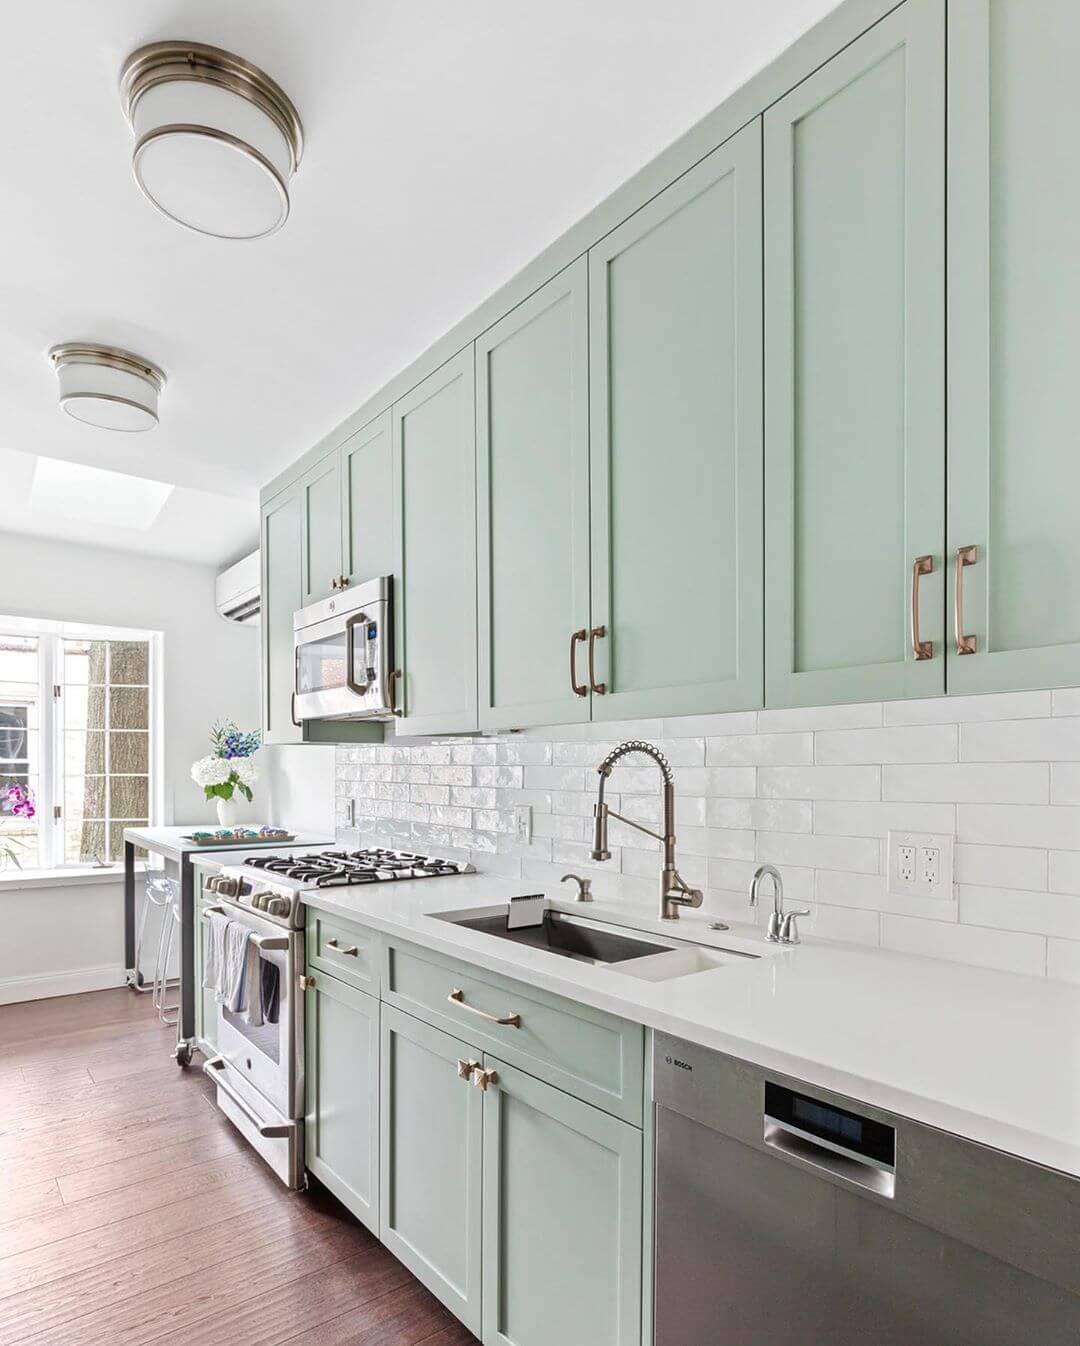 Mint green kitchen cabinets are in this year